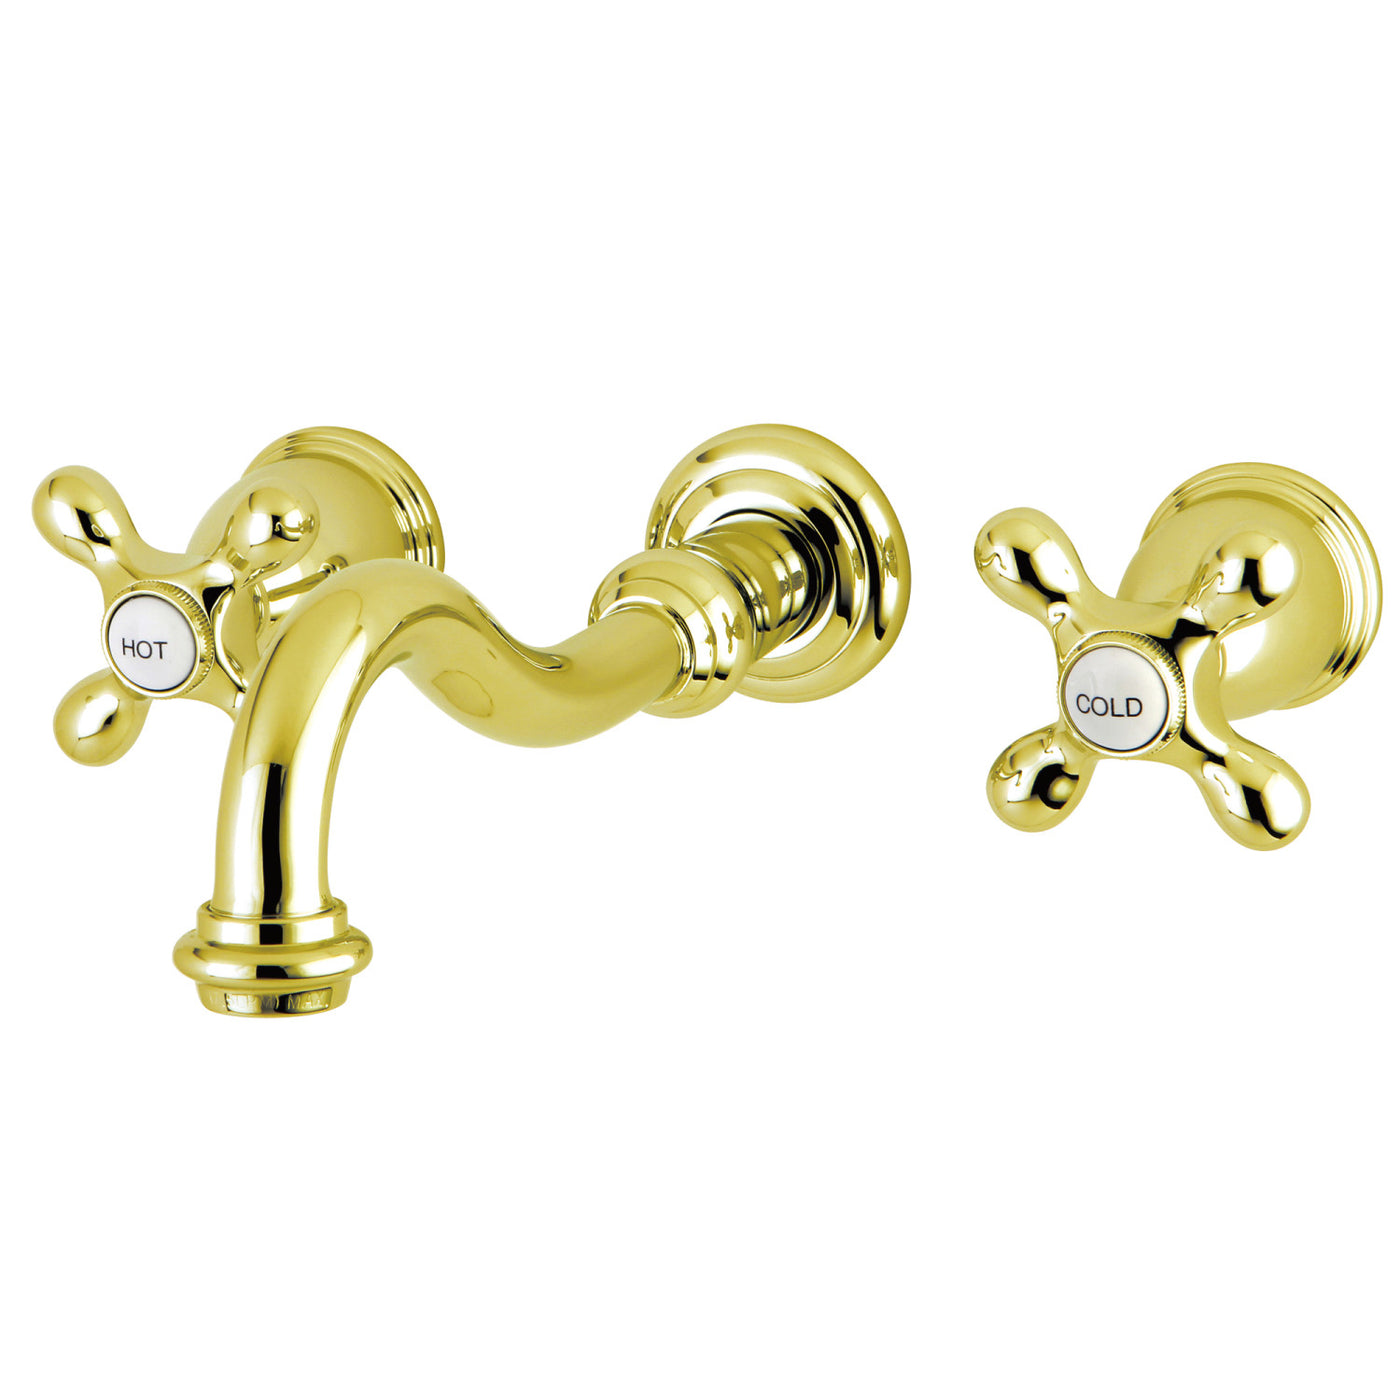 Elements of Design ES3122AX 2-Handle Wall Mount Bathroom Faucet, Polished Brass